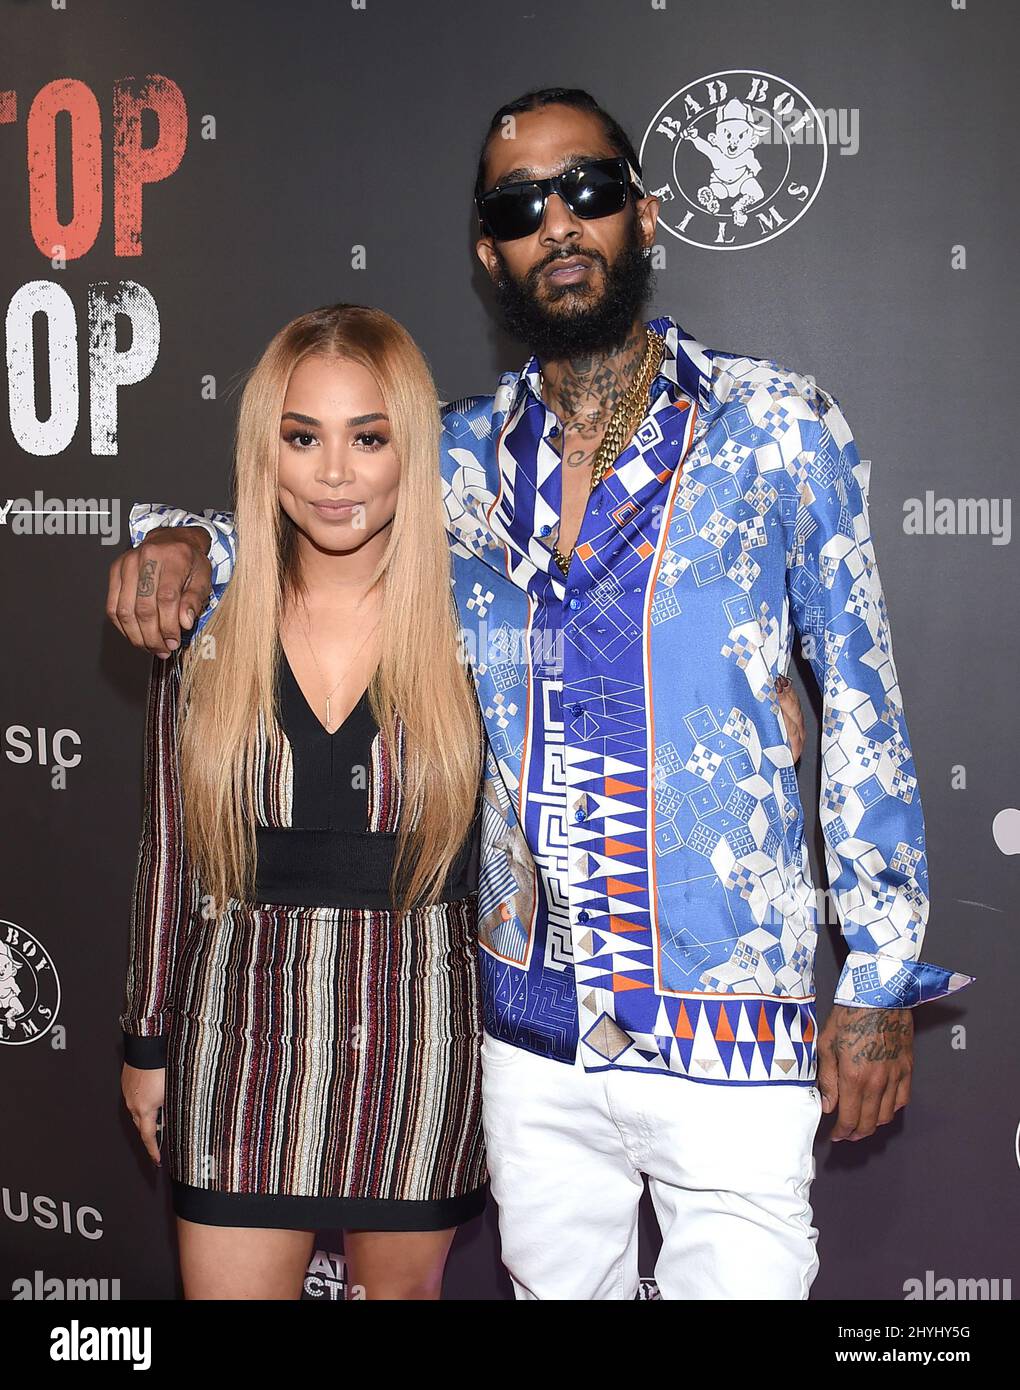 Nipsey Hussle aka Ermias Ashgedom was killed in a shooting outside his Marathon Clothing store in Los Angeles, Ca. on March 31, 2019. Stock Photo